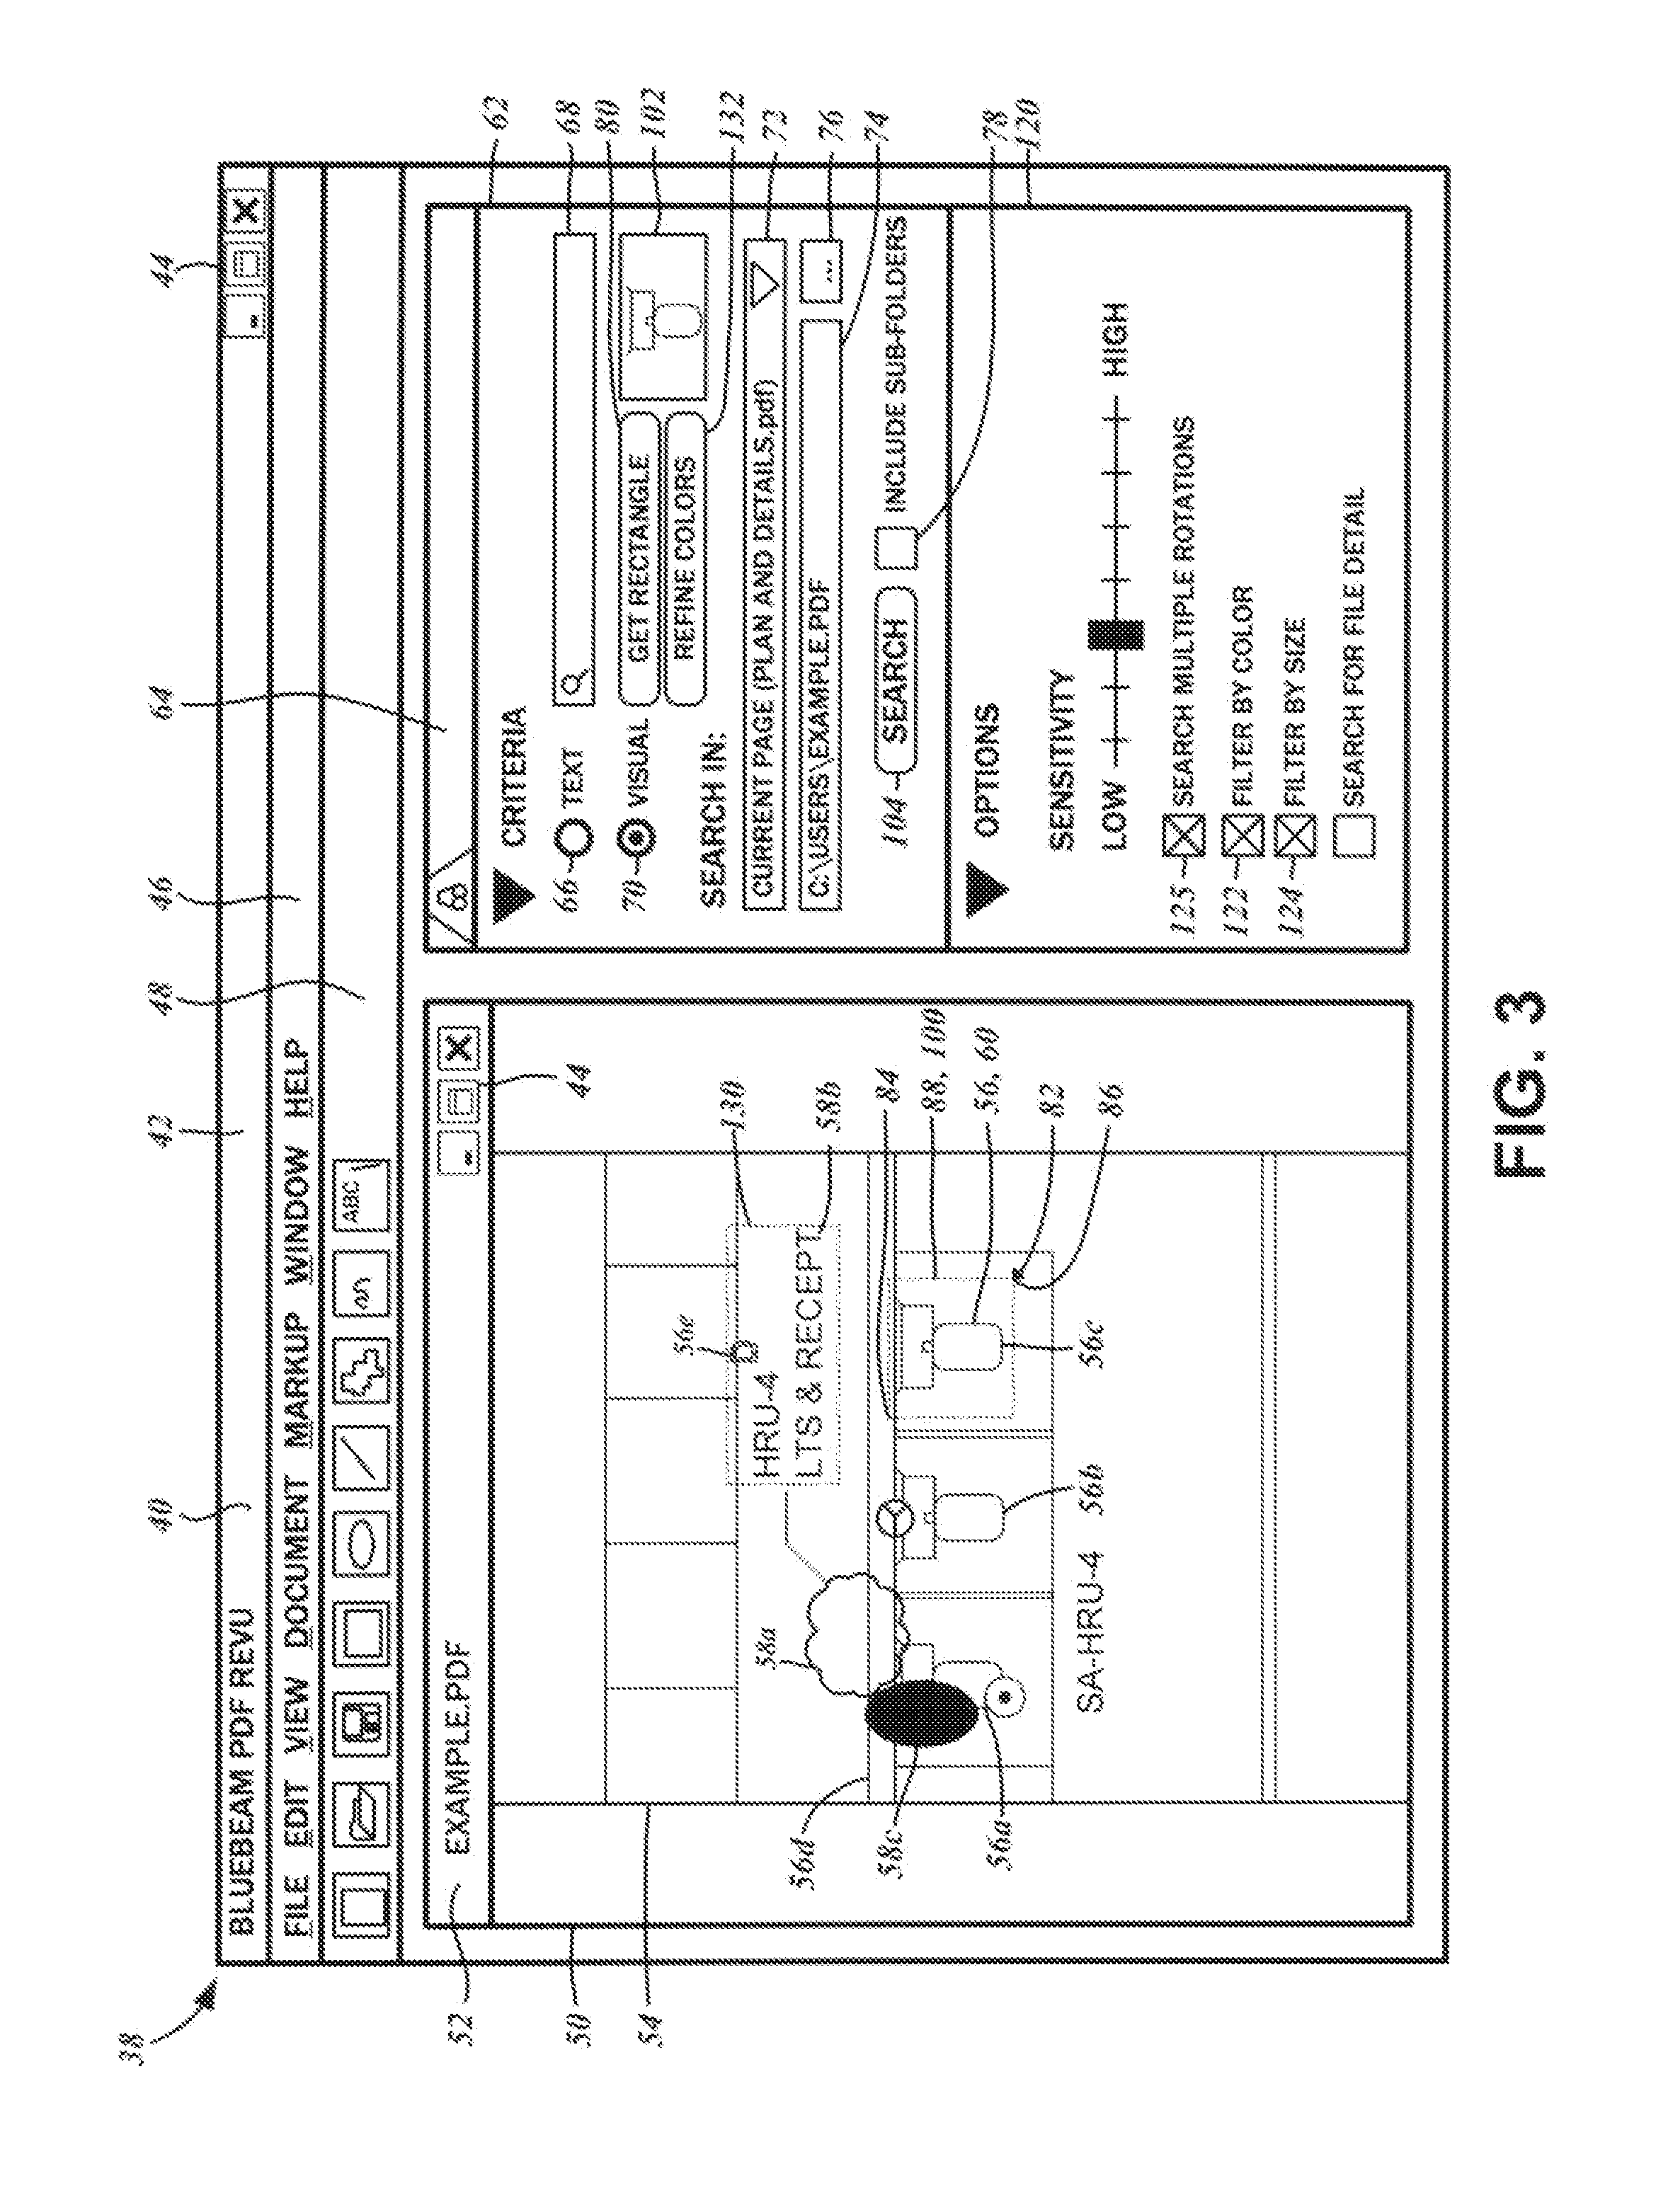 Method for color and size based pre-filtering for visual object searching of documents